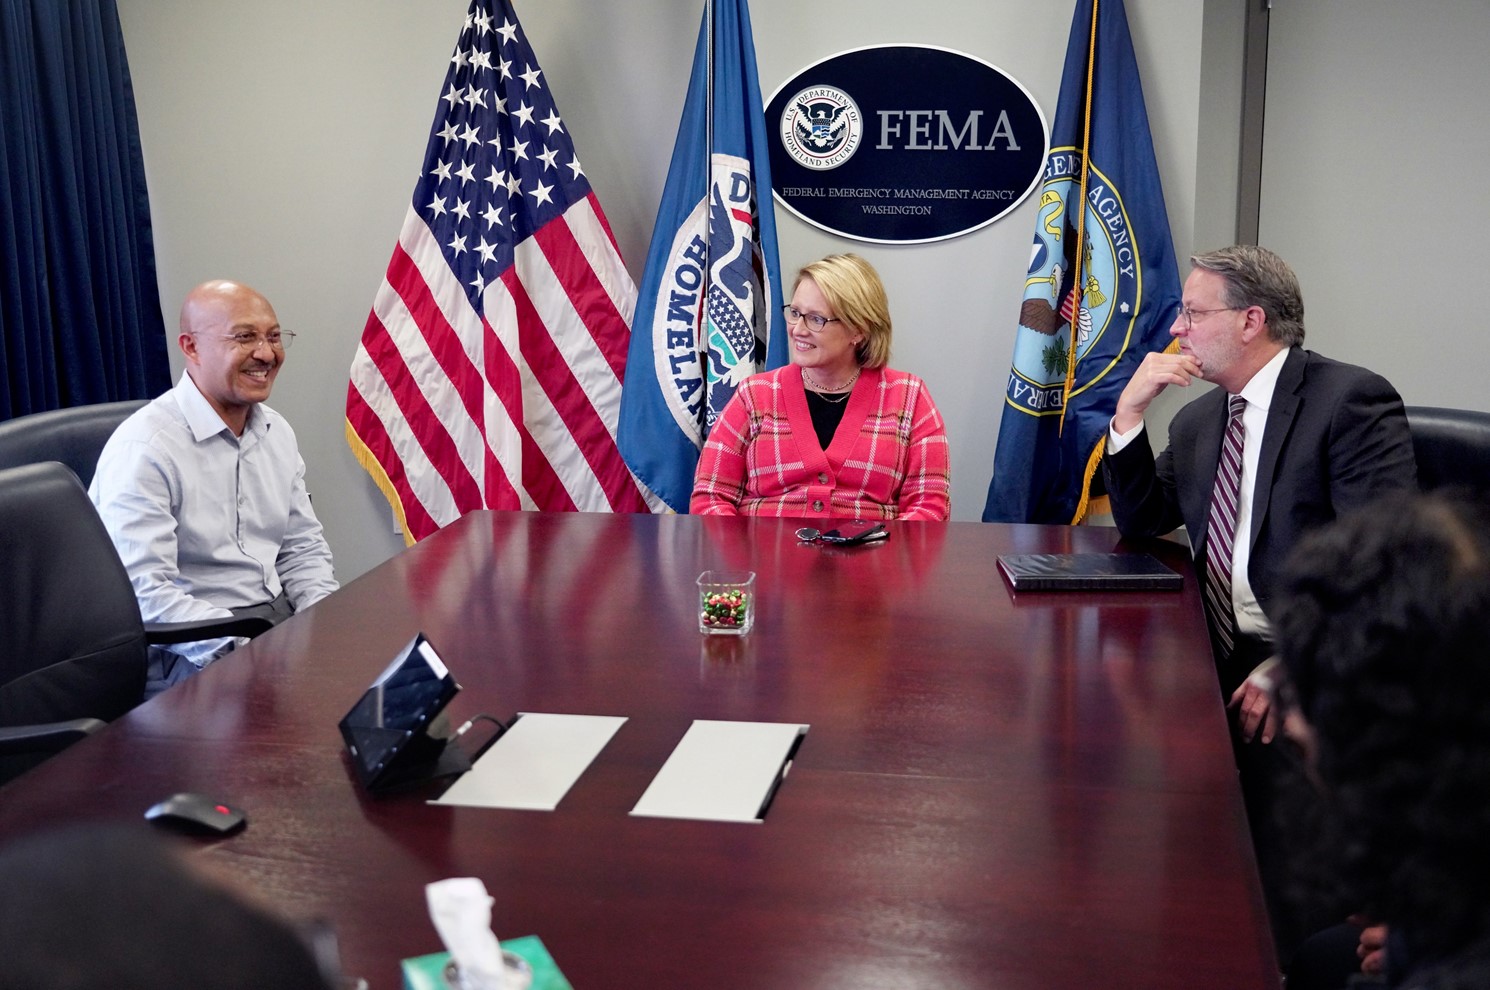 FEMA Administrator Deanne Criswell (right, center) and Sen. Gary Peters (left, center) meet with FEMA staff from Michigan after announcing funding for the Safeguarding Tomorrow Revolving Loan Fund grant program.